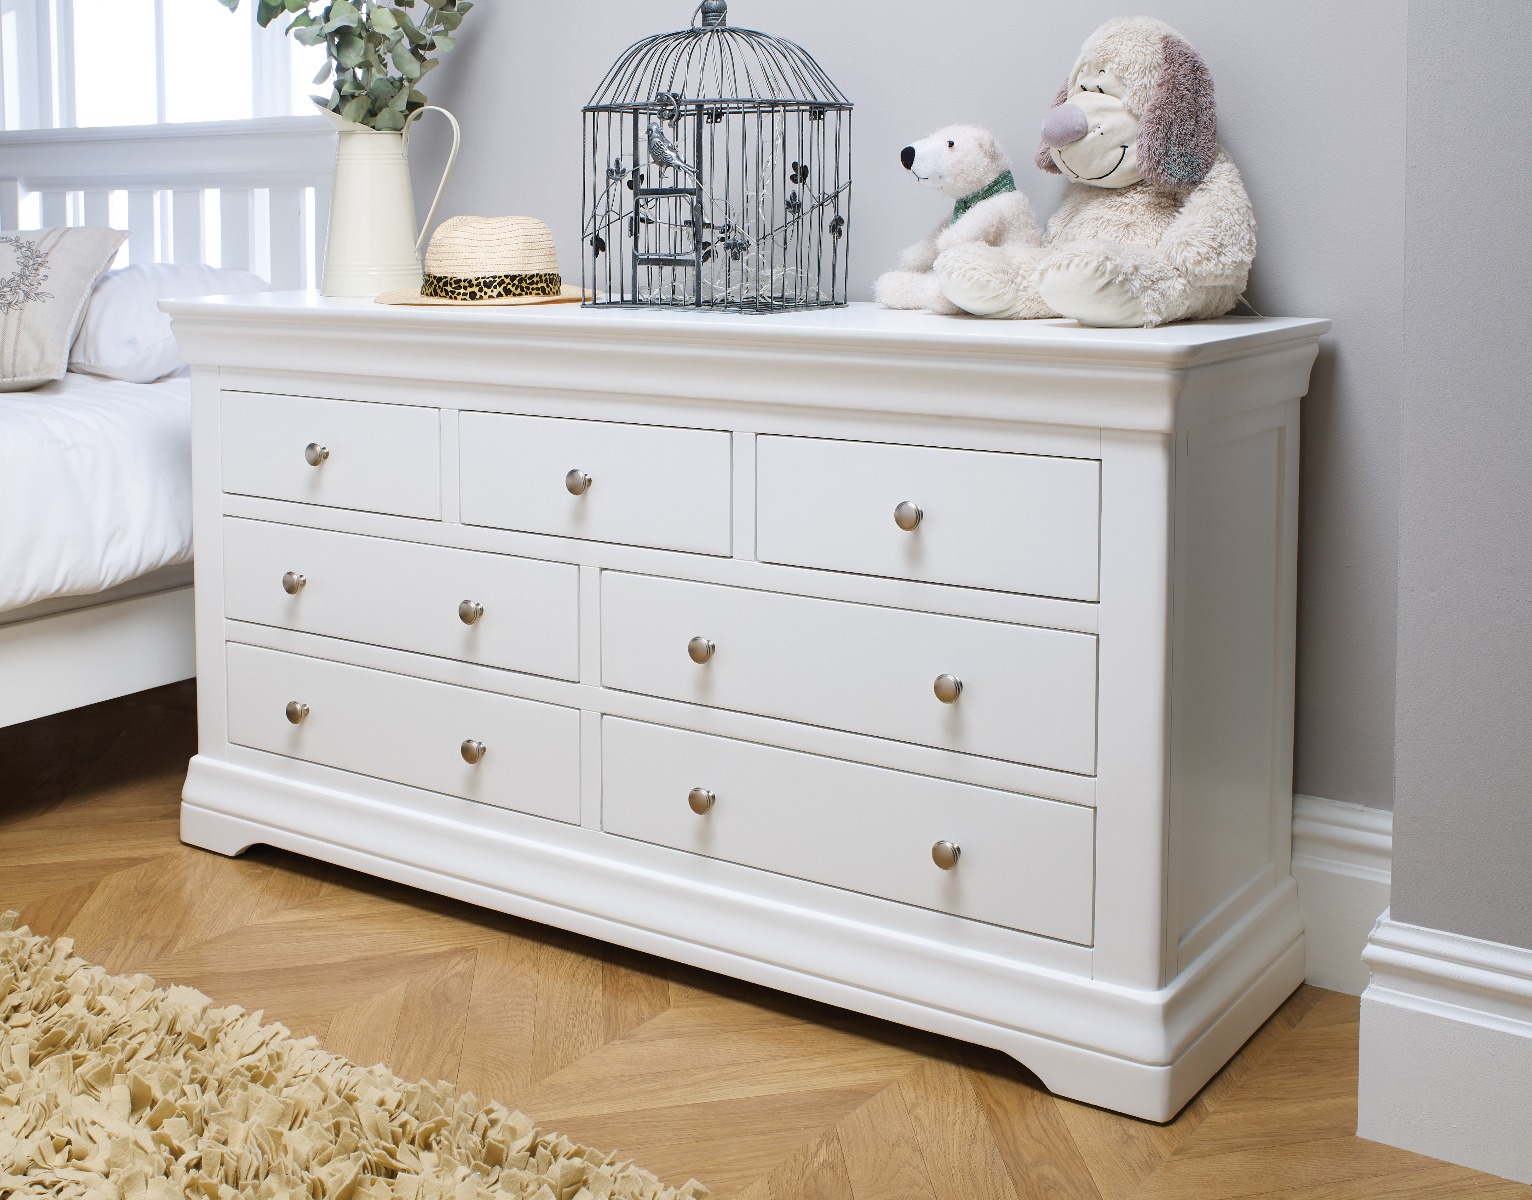 A white chest of drawers in a bedroom with a bird cage.